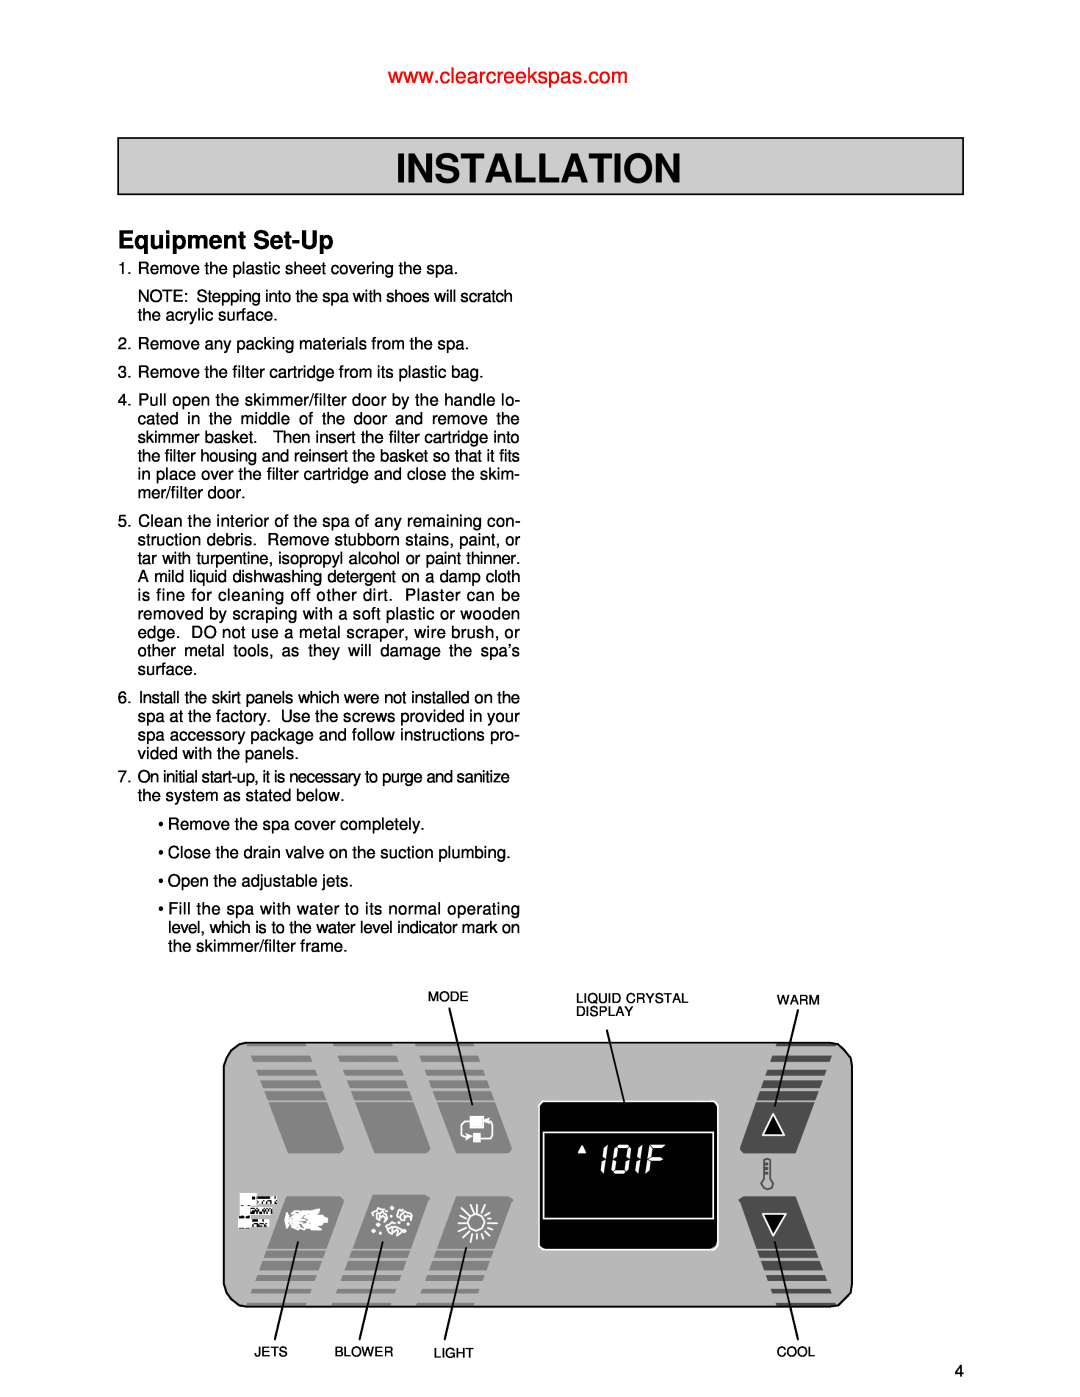 Jacuzzi Whirlpool Spa owner manual Equipment Set-Up, Installation 